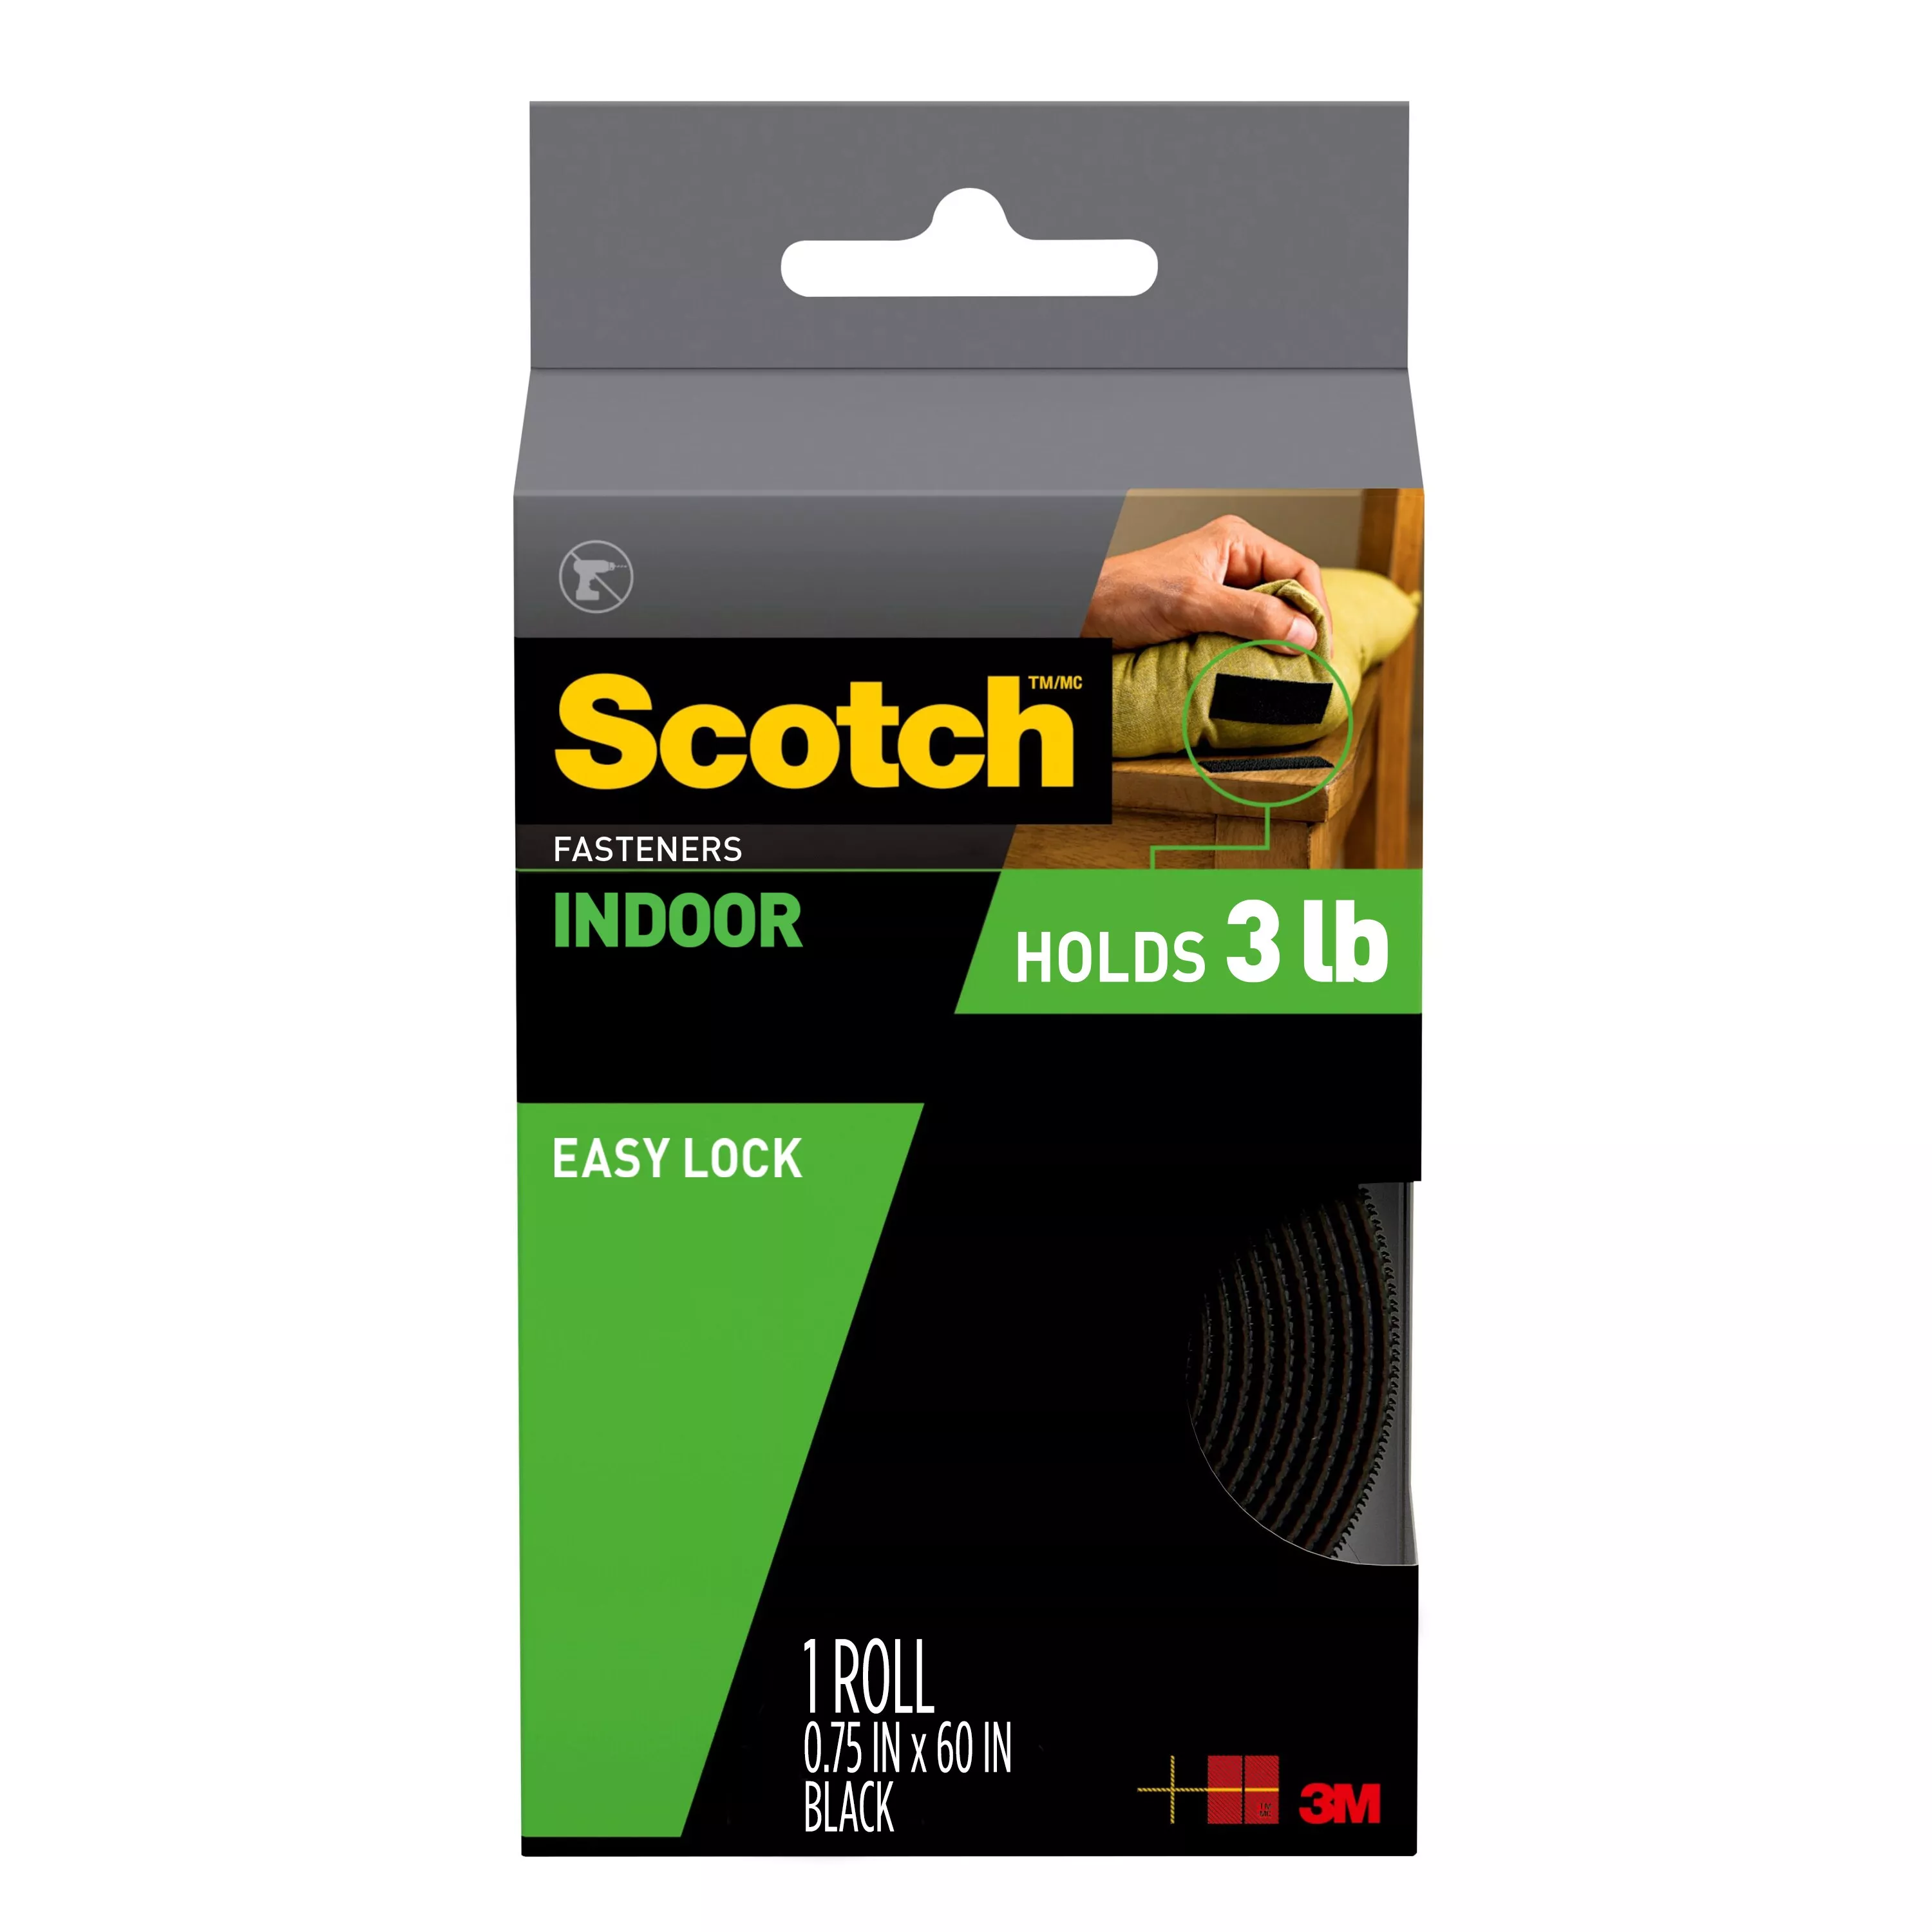 Scotch™ Indoor Fasteners RF4741, 3/4 in x 5 ft (19,0 mm x 1,52 m) Black
1 Set of Strips